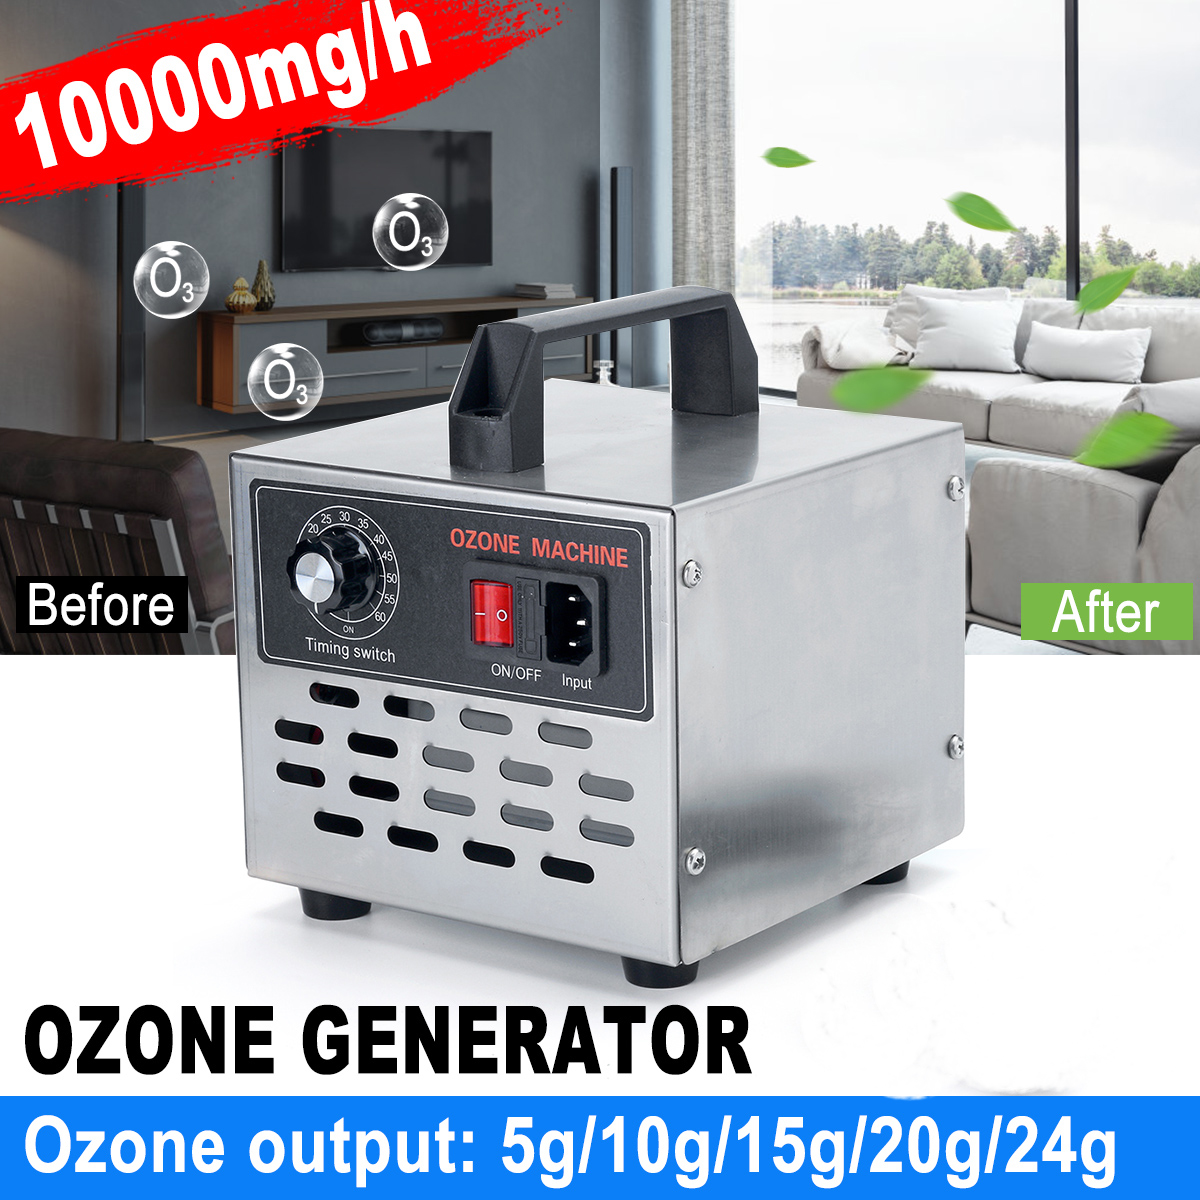 5g-24g Ozone Generator Ozone Machine Stainless Steel Air Purifier Air Cleaner Disinfection Cleaning